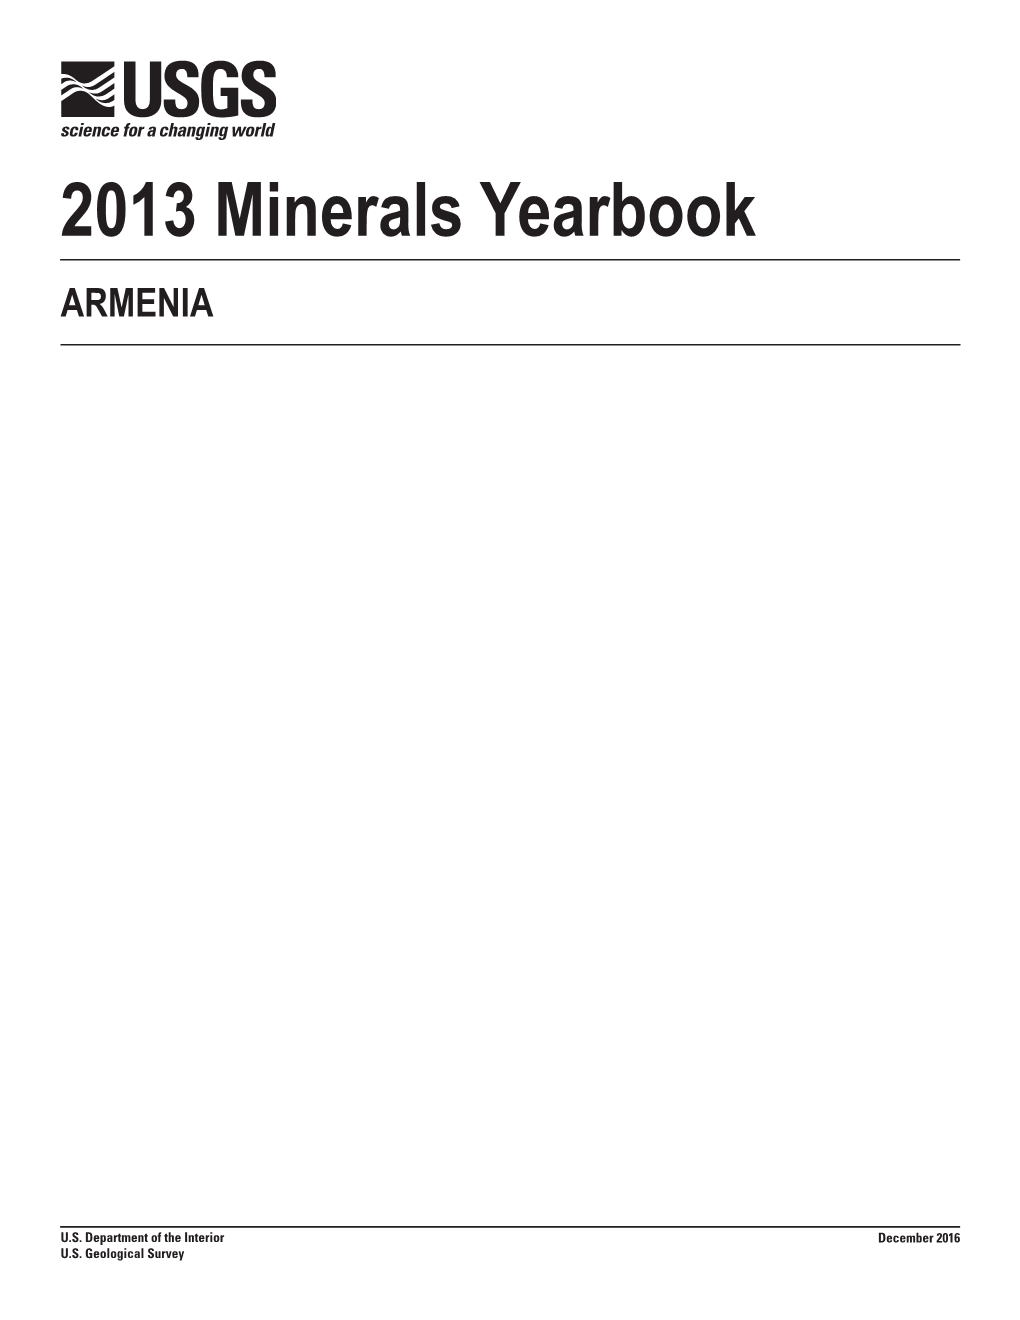 The Mineral Industry of Armenia in 2013